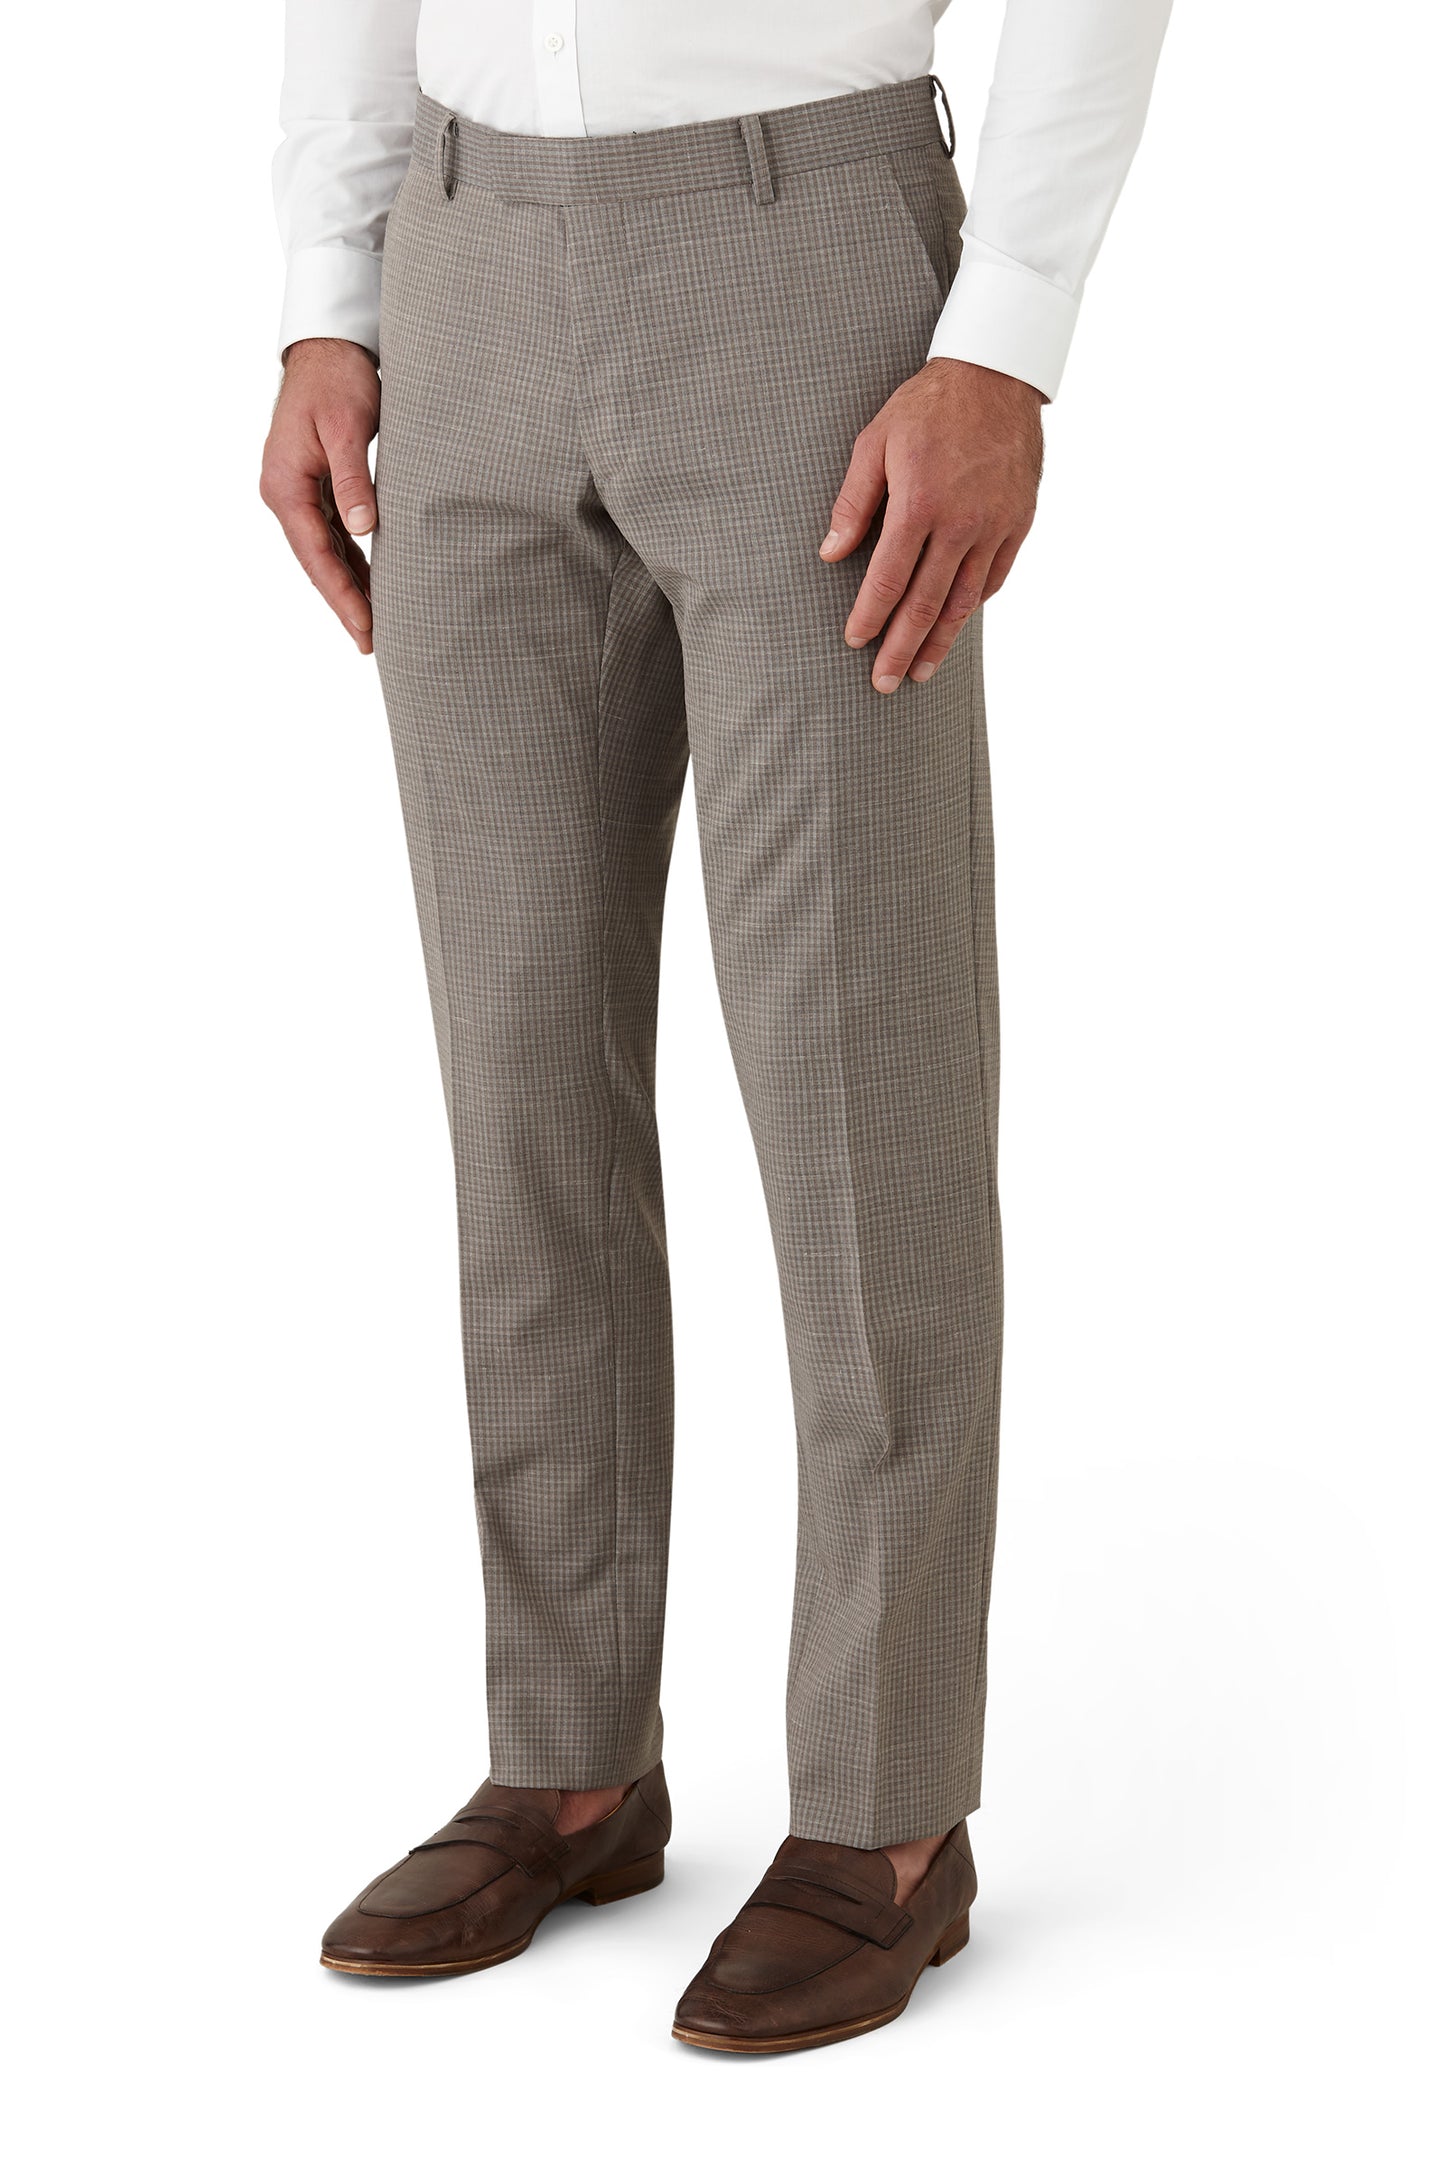 Gibson - Ionic/Caper Suit - Taupe Check